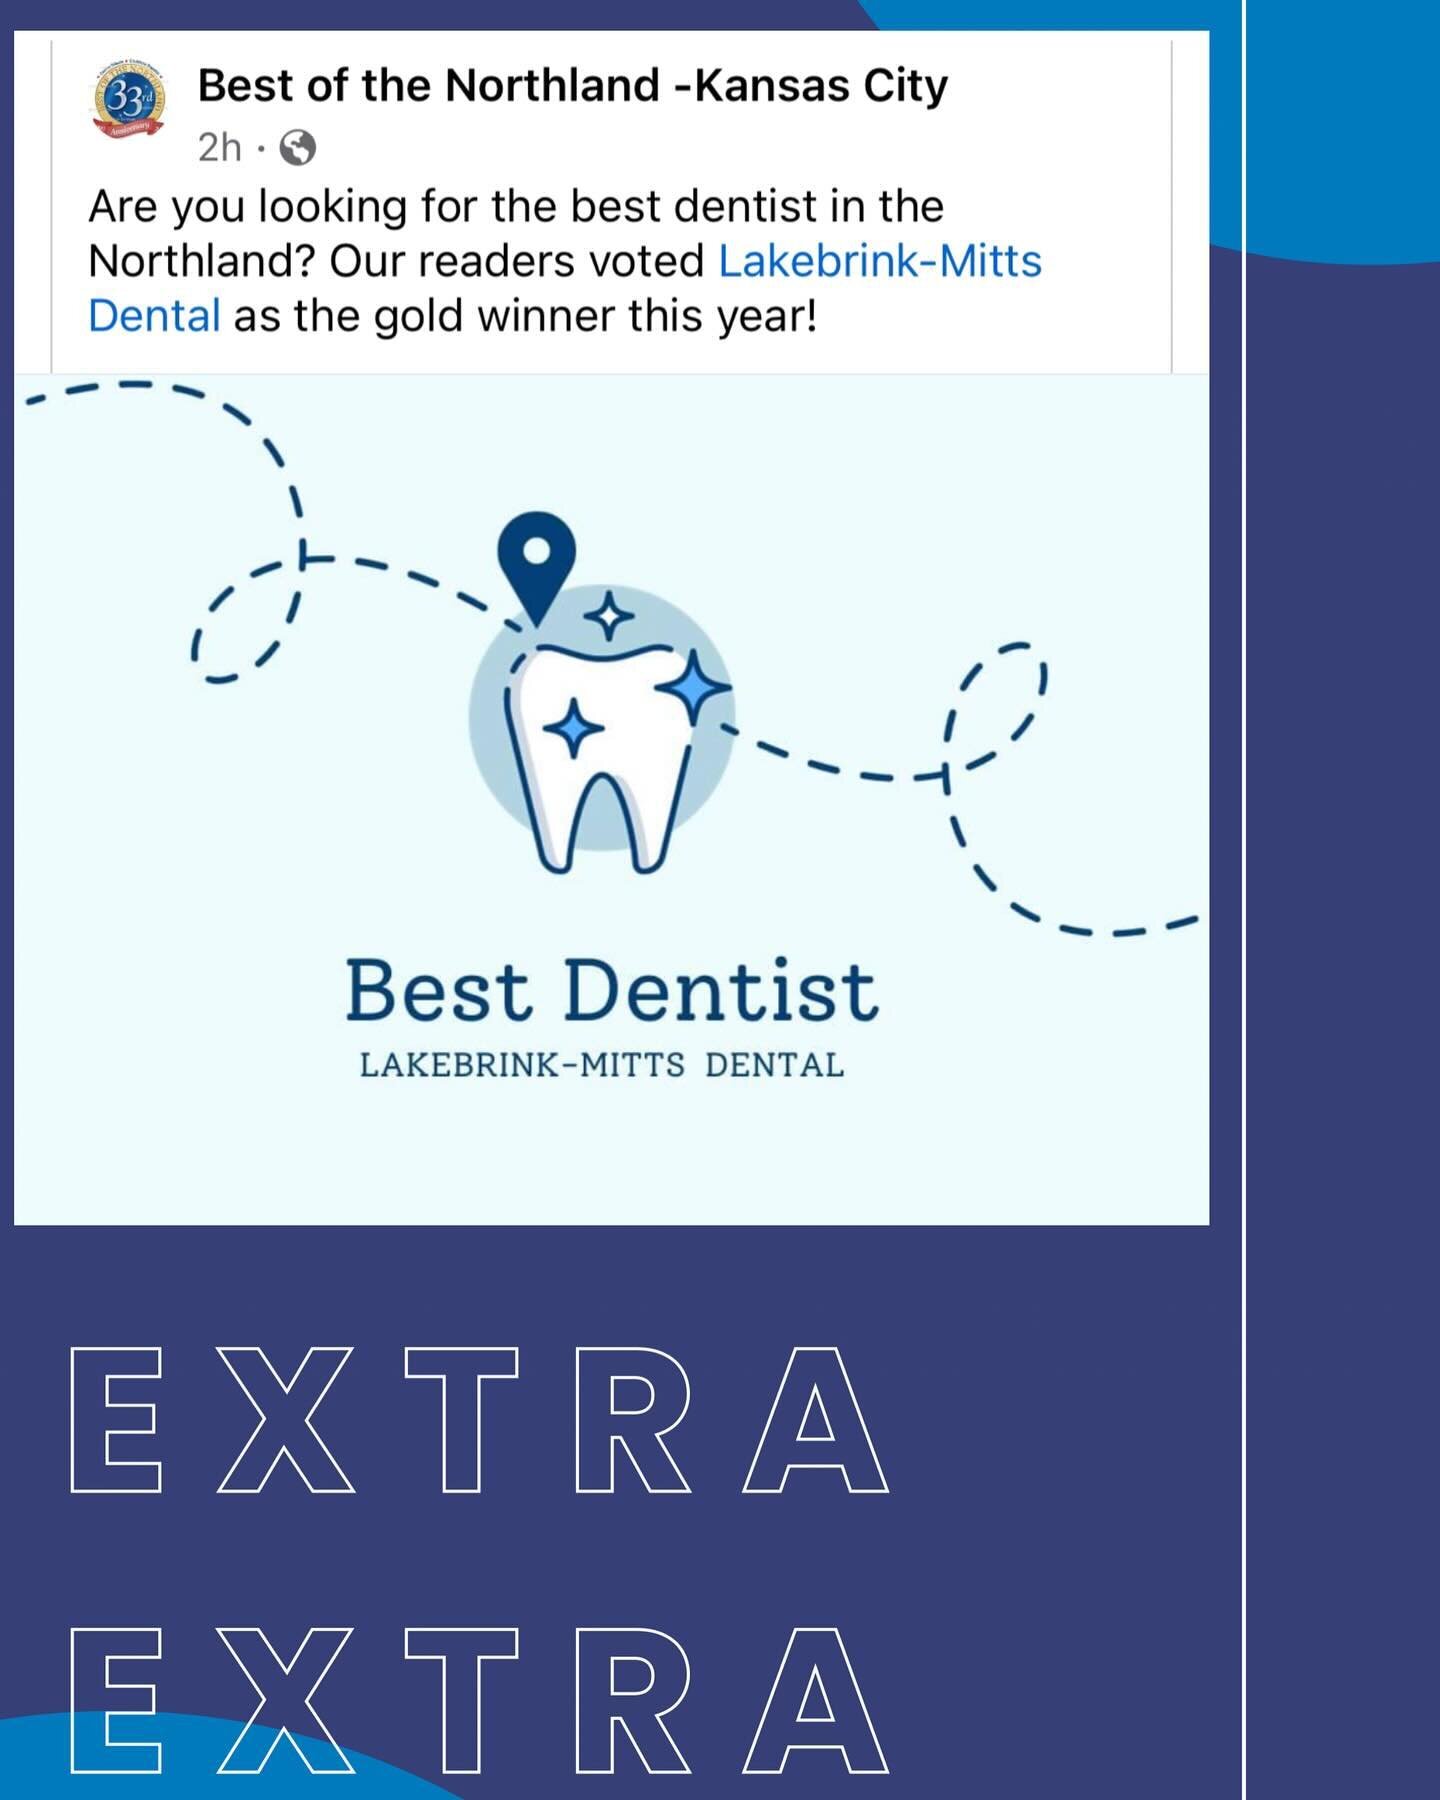 We love you guys as much as you love us !!! Thanks for the votes, our staff has worked hard to earn it! We couldn&rsquo;t do it without all of our amazing staff, dentists, and patients!!! Way to go @lakebrinkmittsdental 🦷